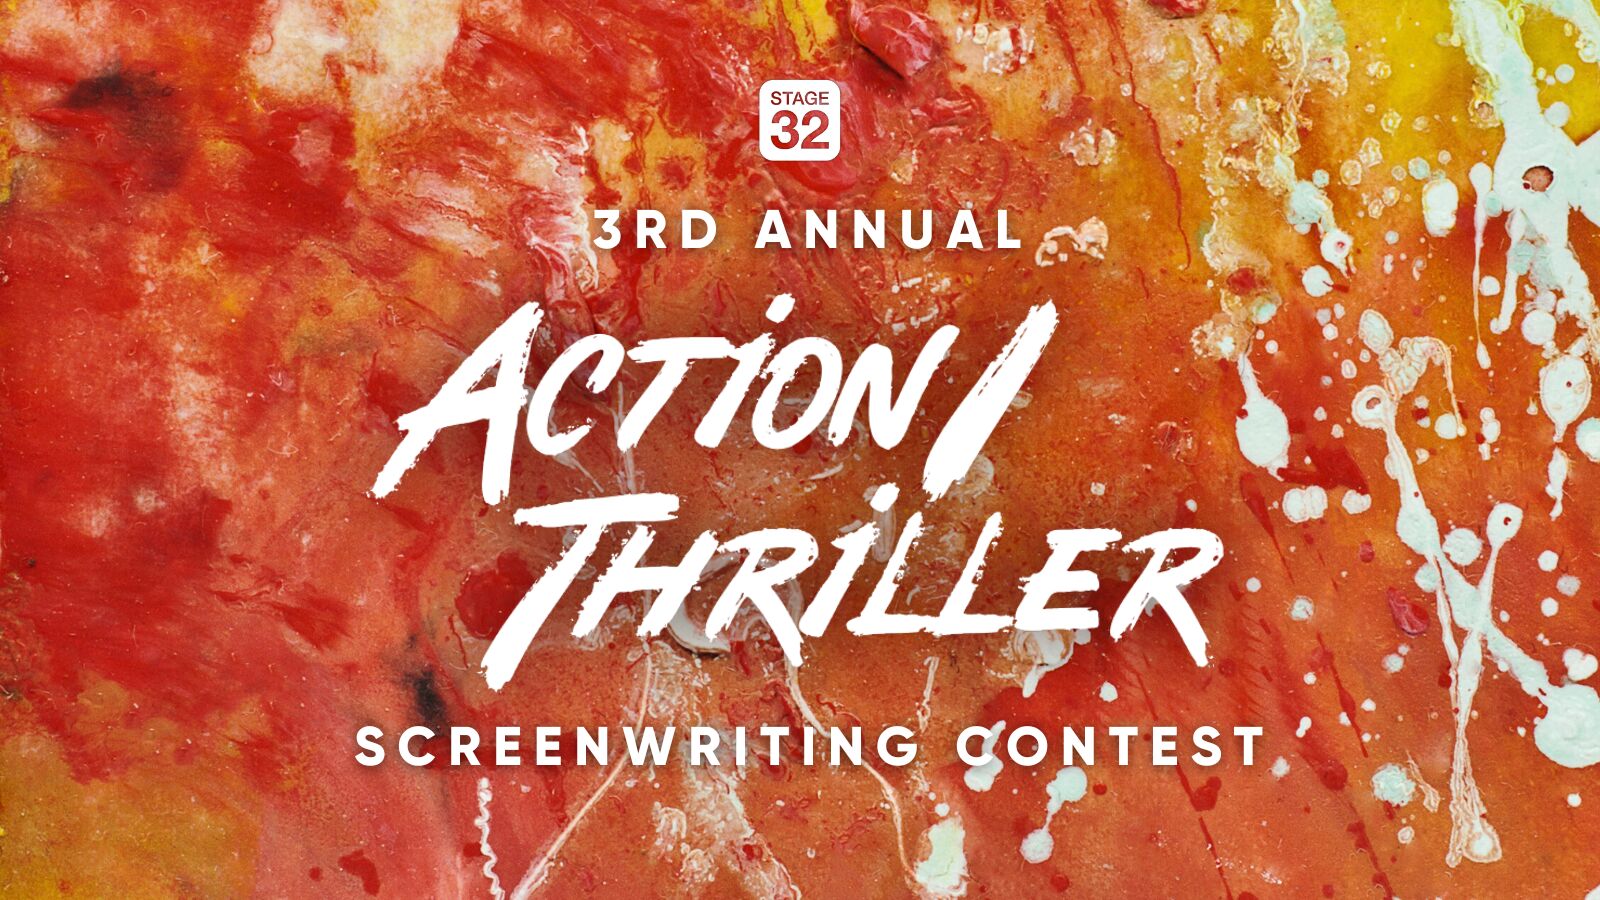 3rd Annual Action/Thriller Screenwriting Contest